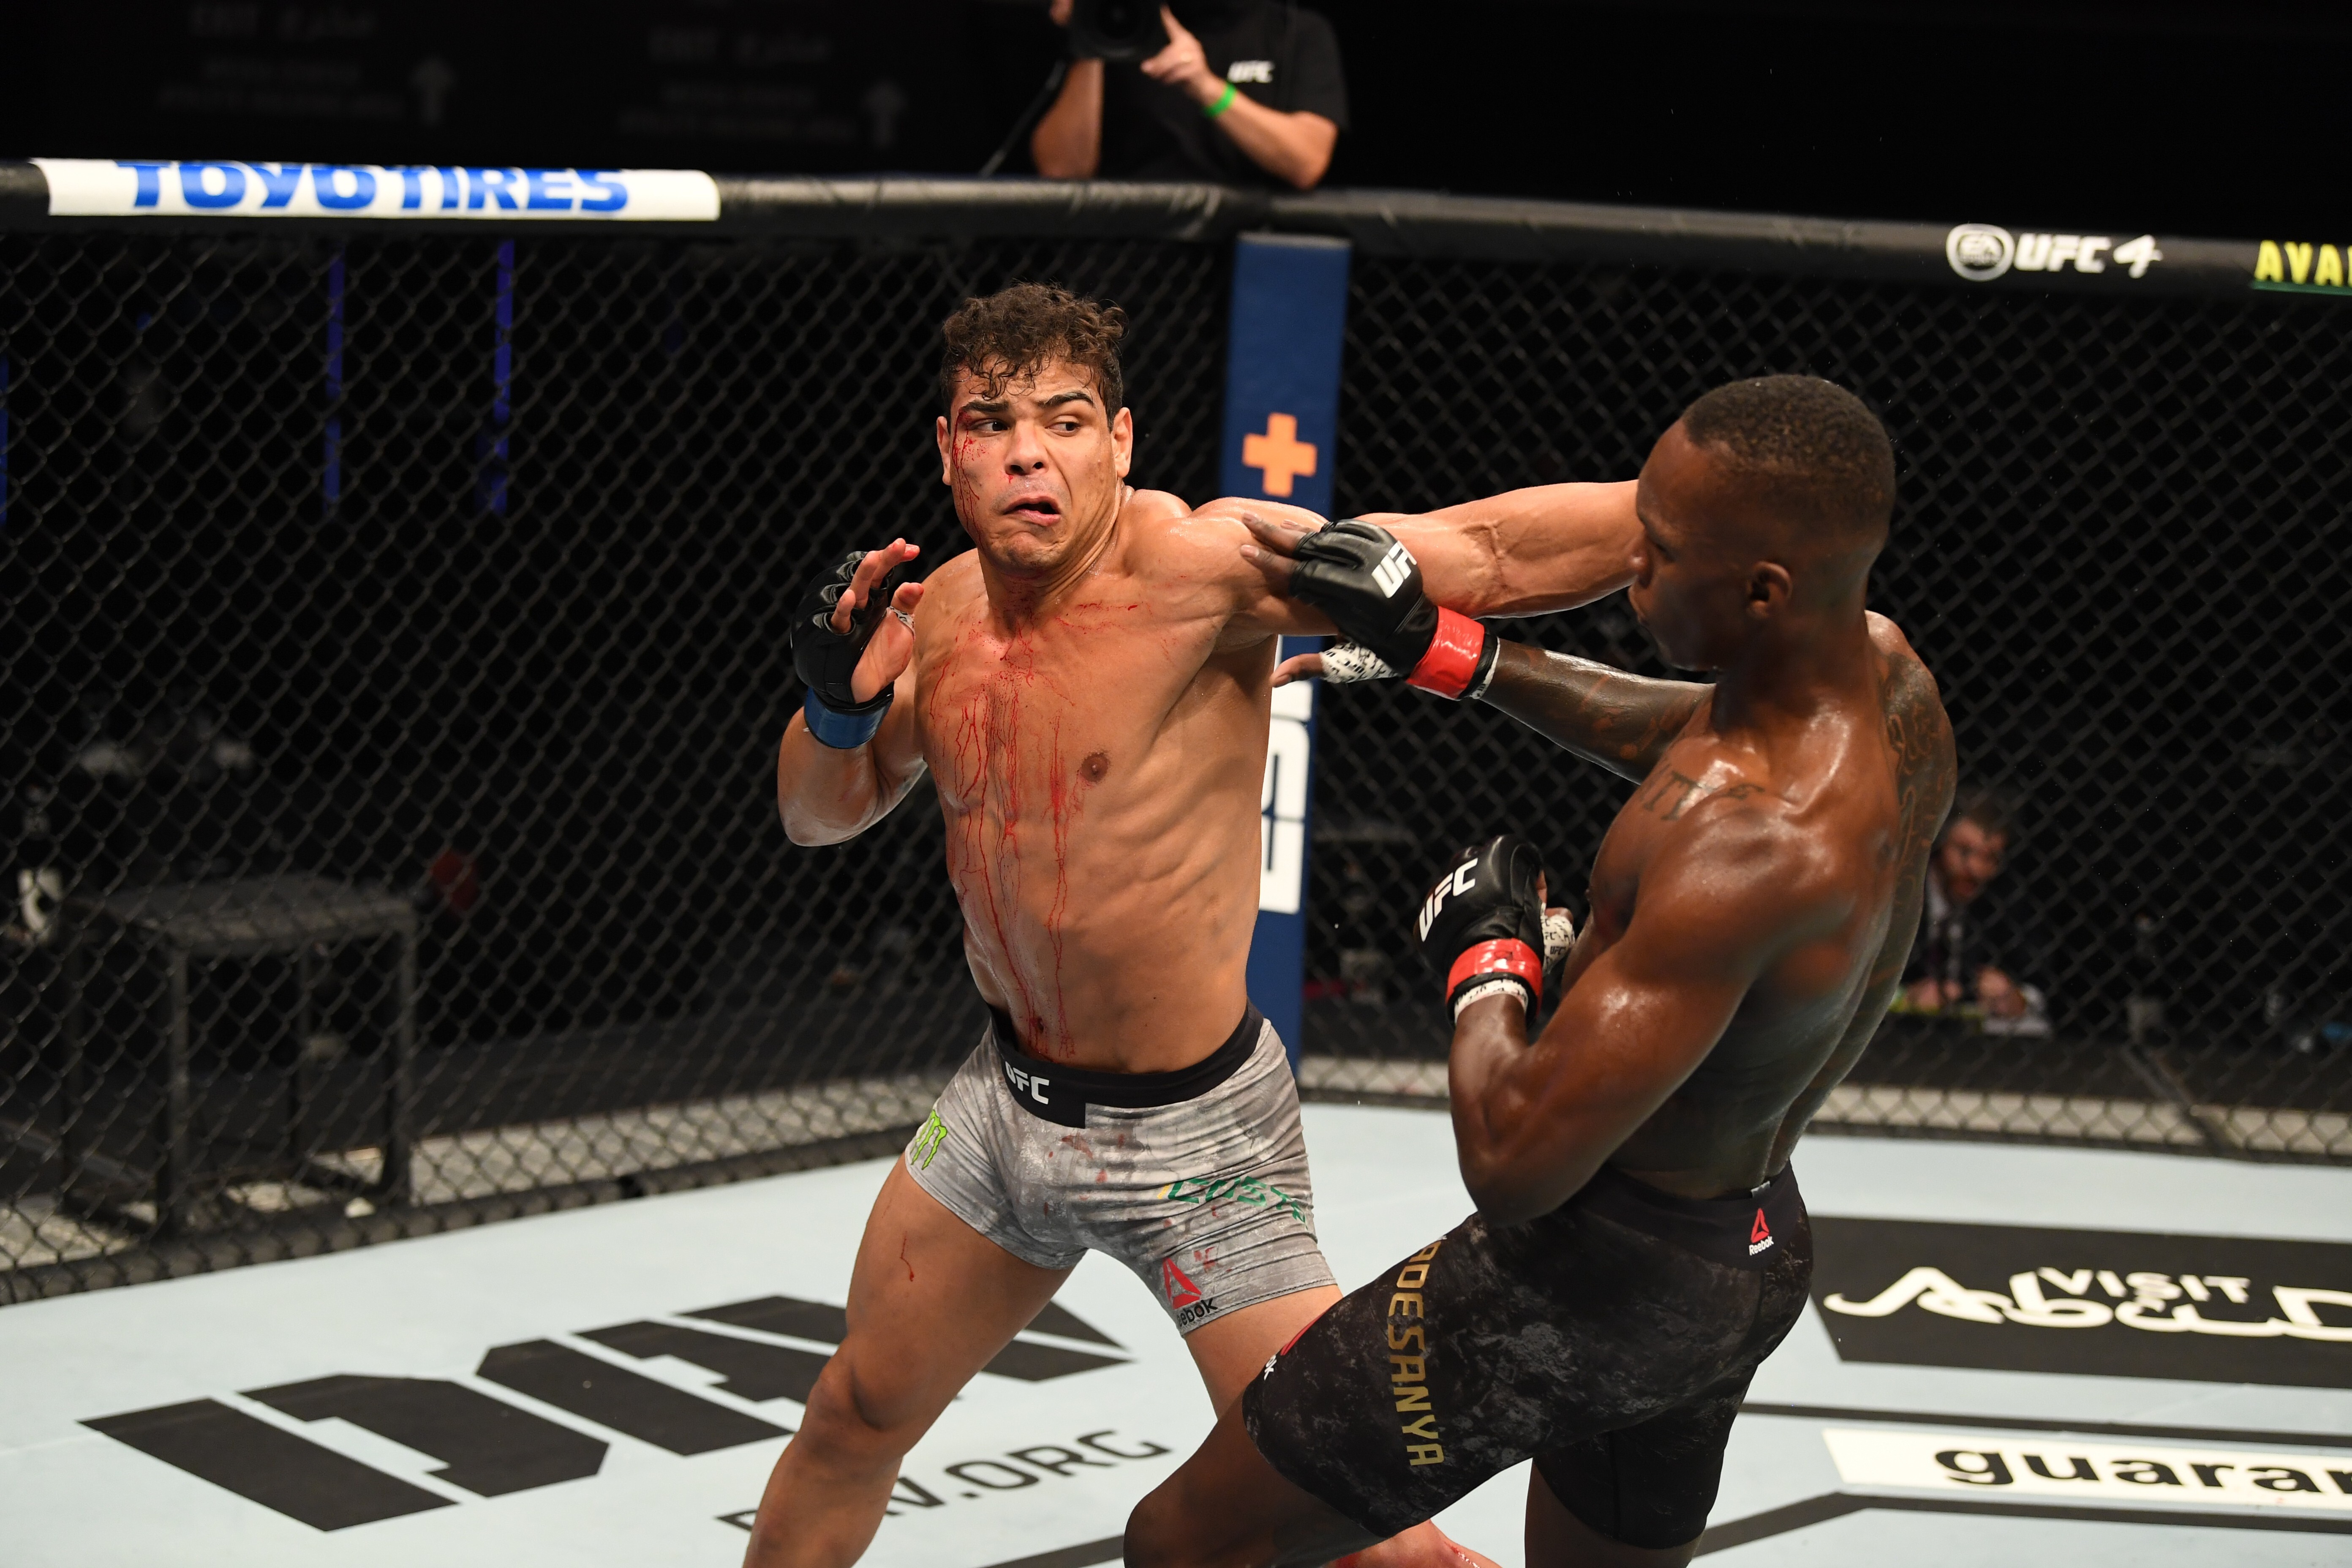 Paulo Costa punches Israel Adesanya in their middleweight championship bout during UFC 253 inside Flash Forum on UFC Fight Island on September 27, 2020 in Abu Dhabi, United Arab Emirates. Photo: Josh Hedges/Zuffa LLC